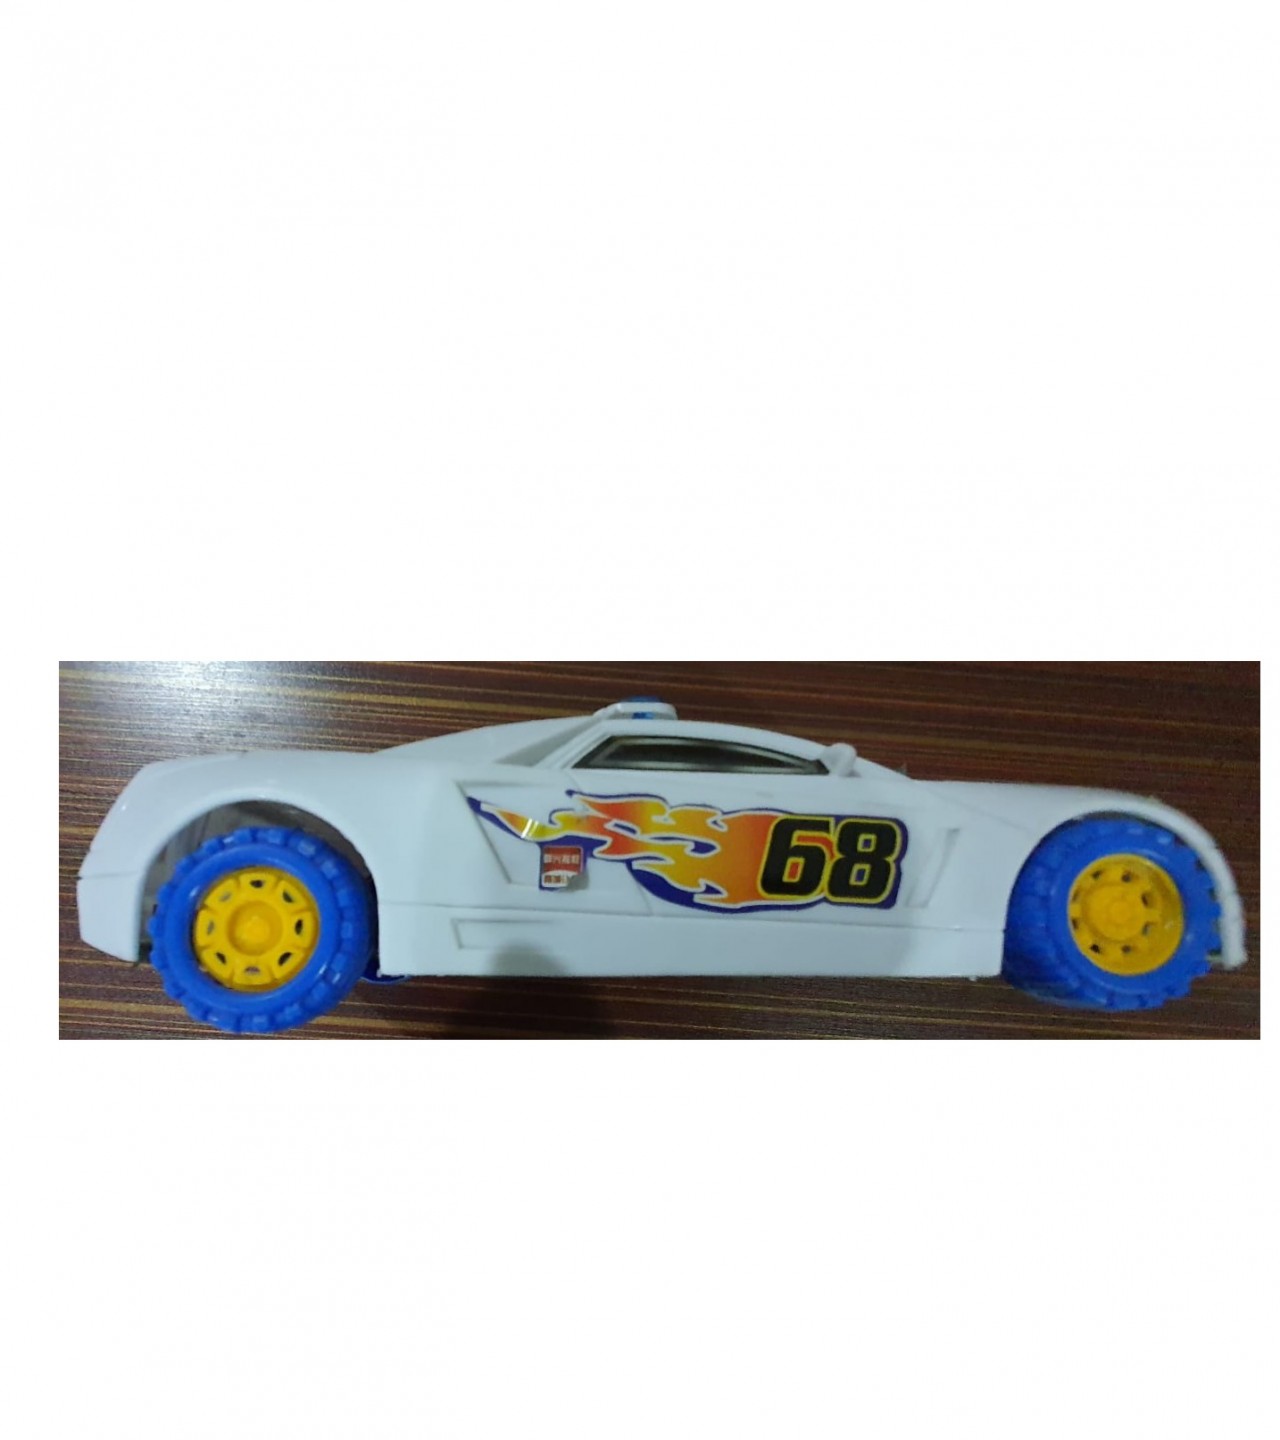 68 Super Racing (Roc Car) (Yellow, Green, White,) Size 12 by 5